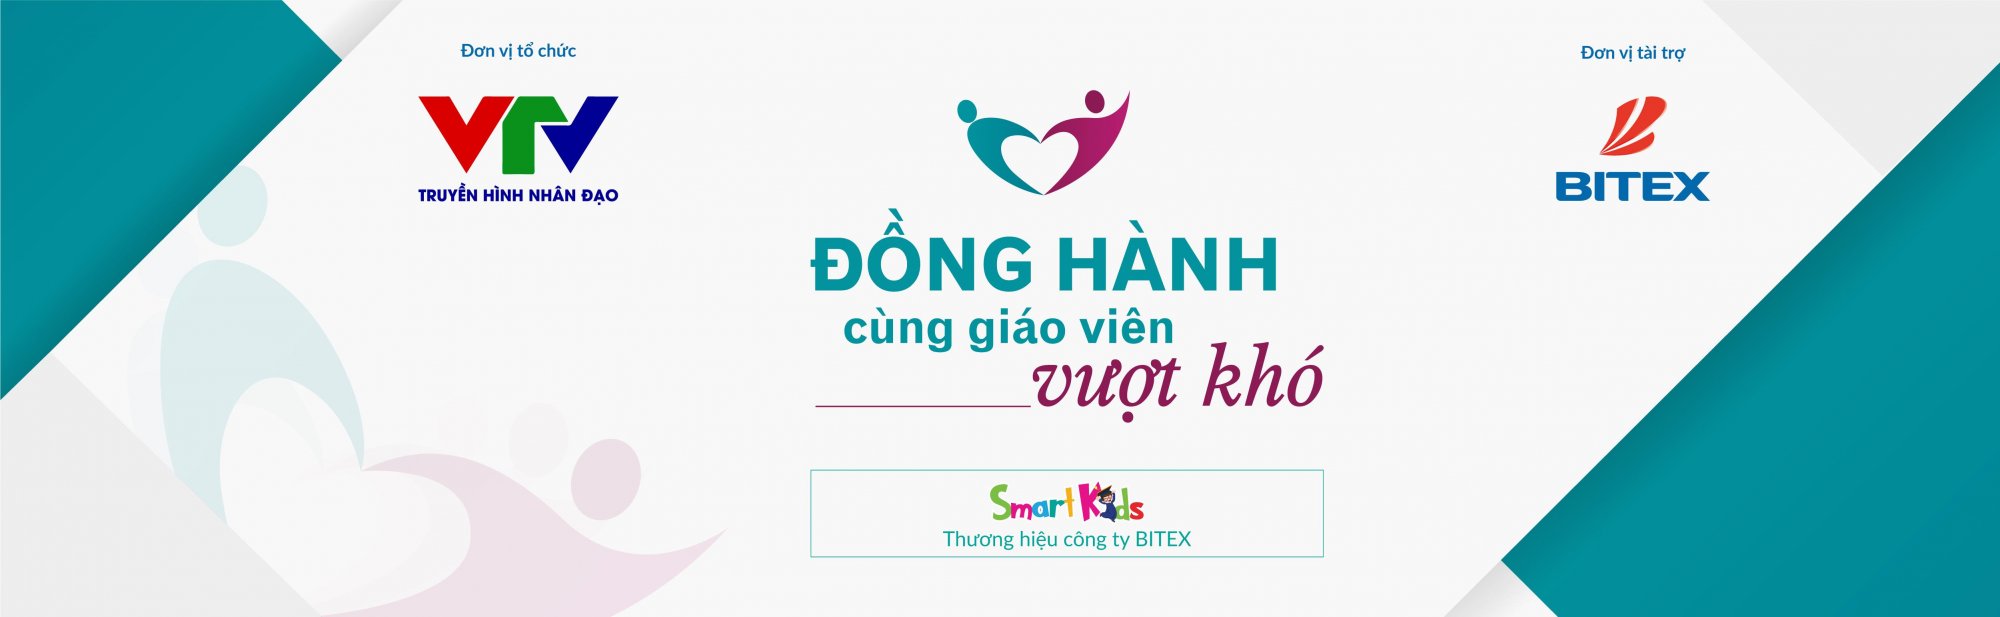 dong hanh cung giao vien